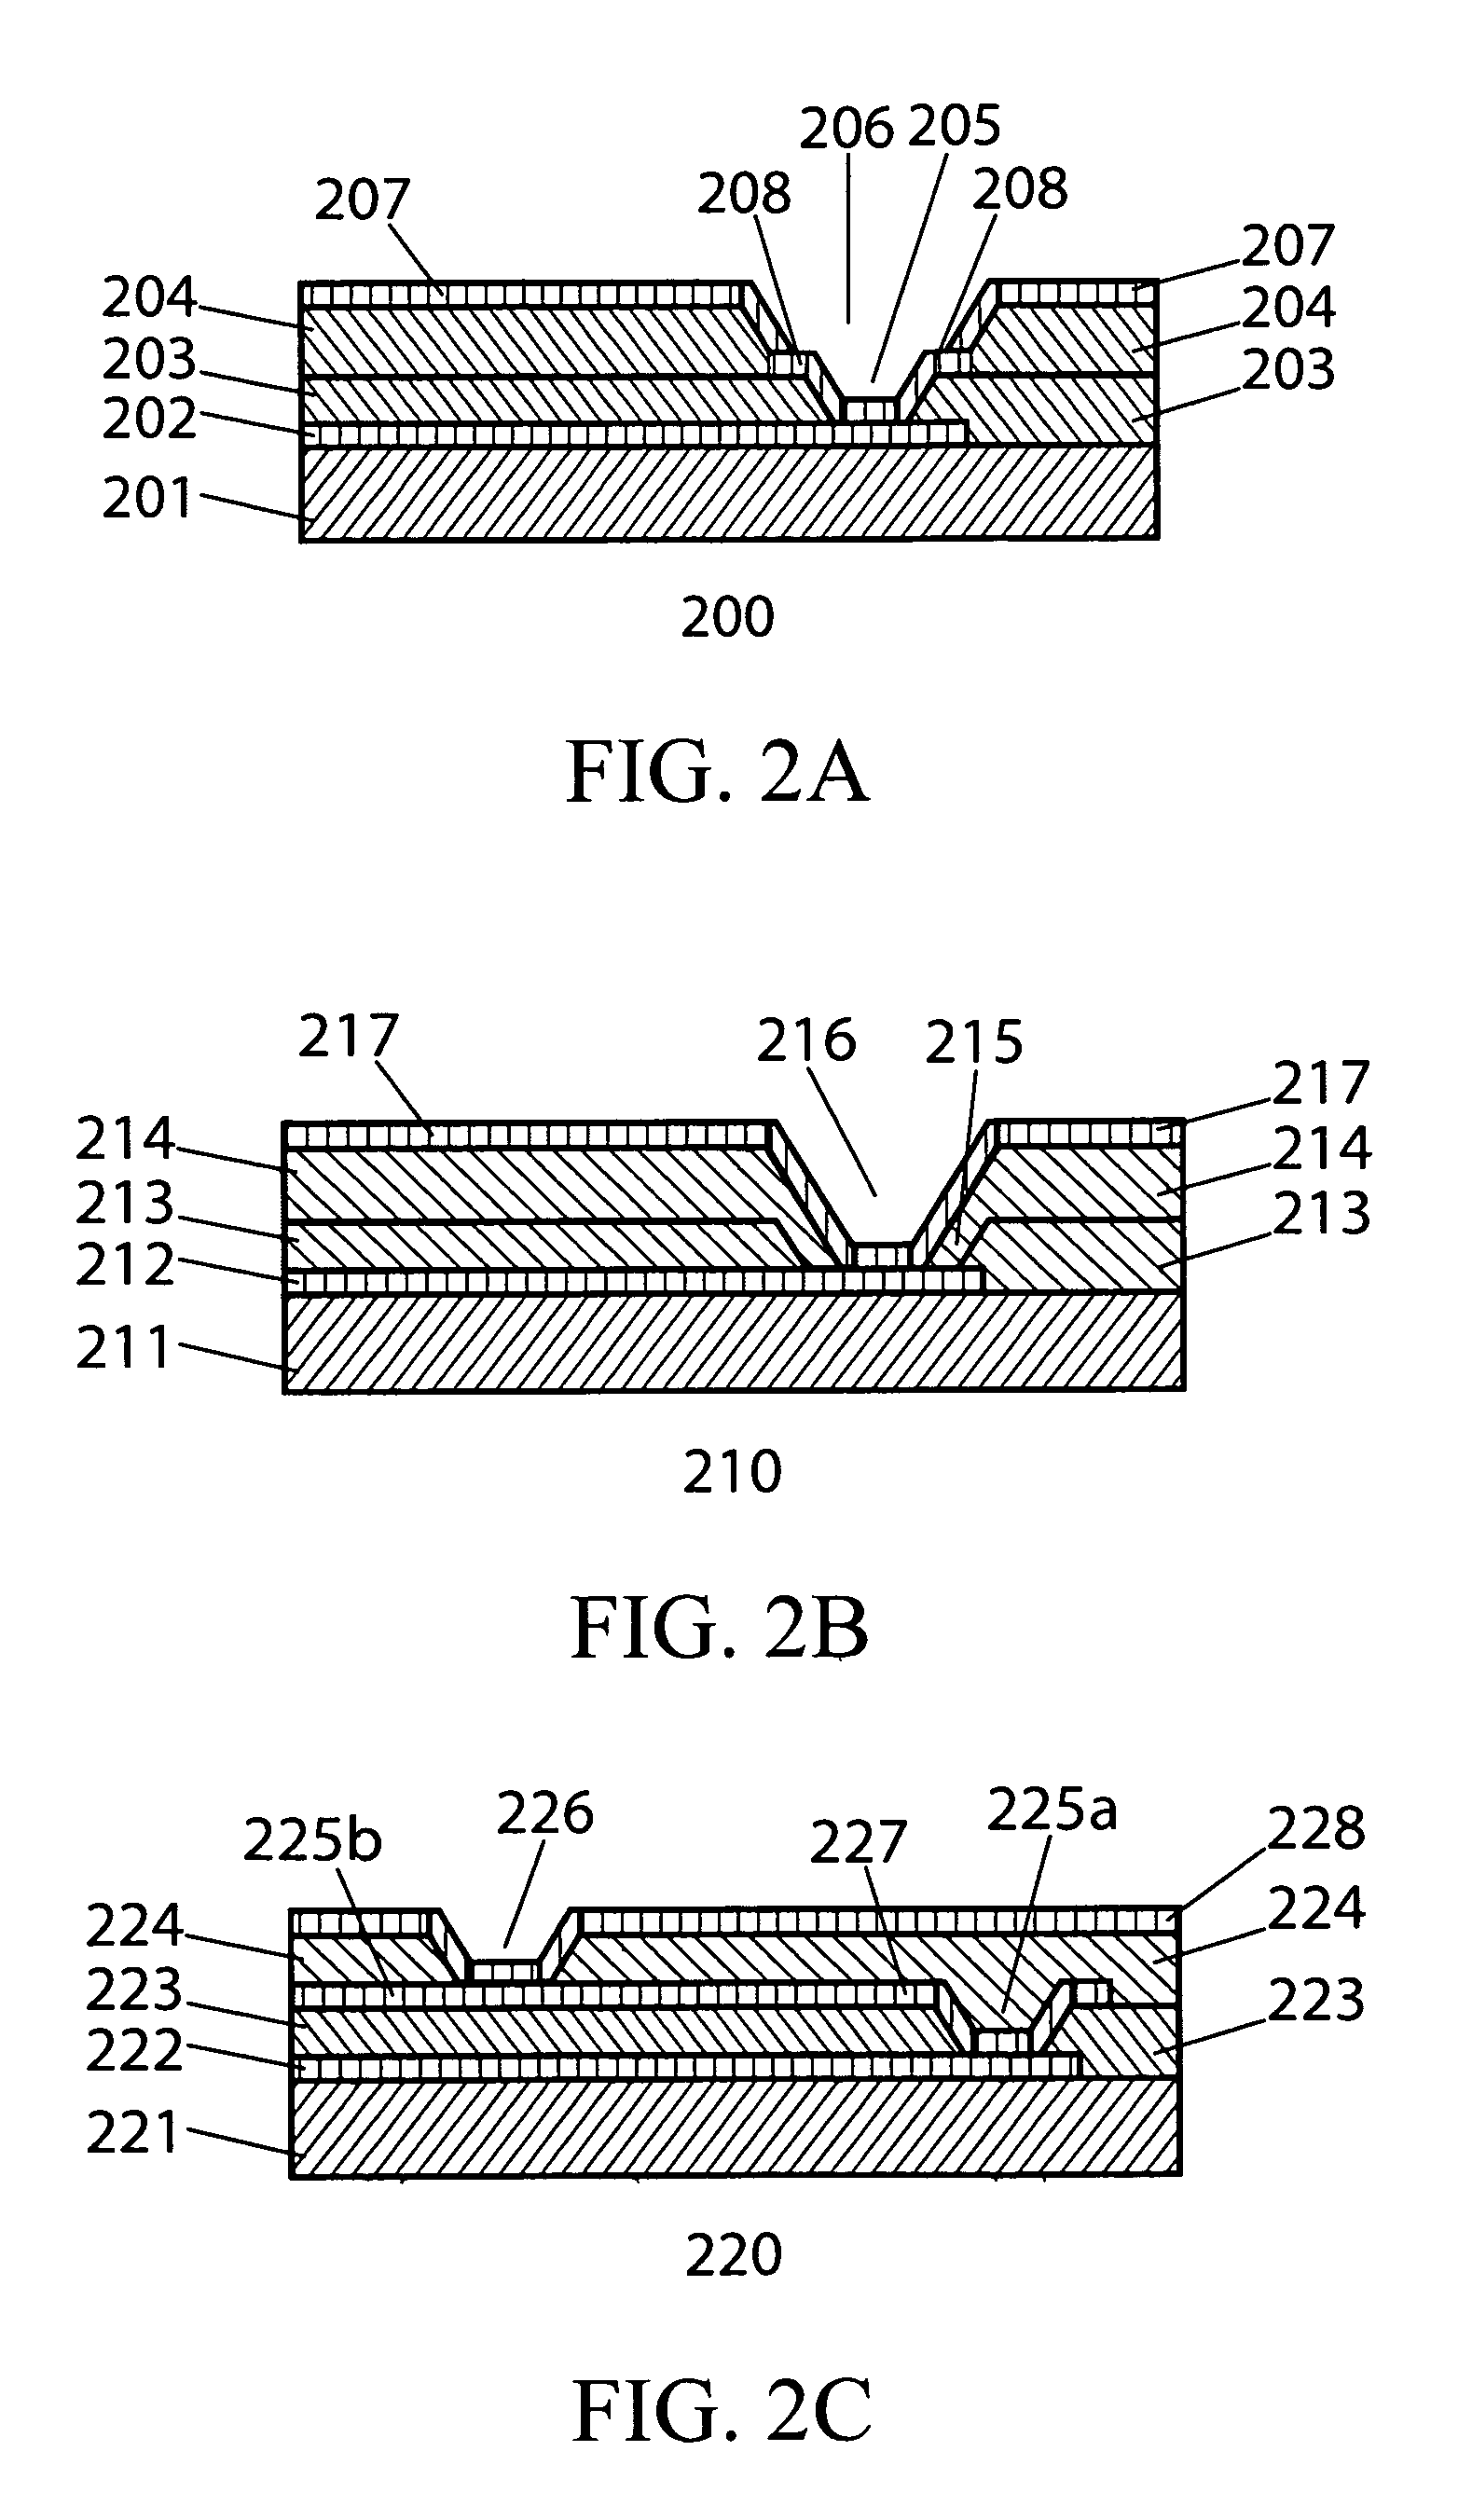 Integrated method for high-density interconnection of electronic components through stretchable interconnects